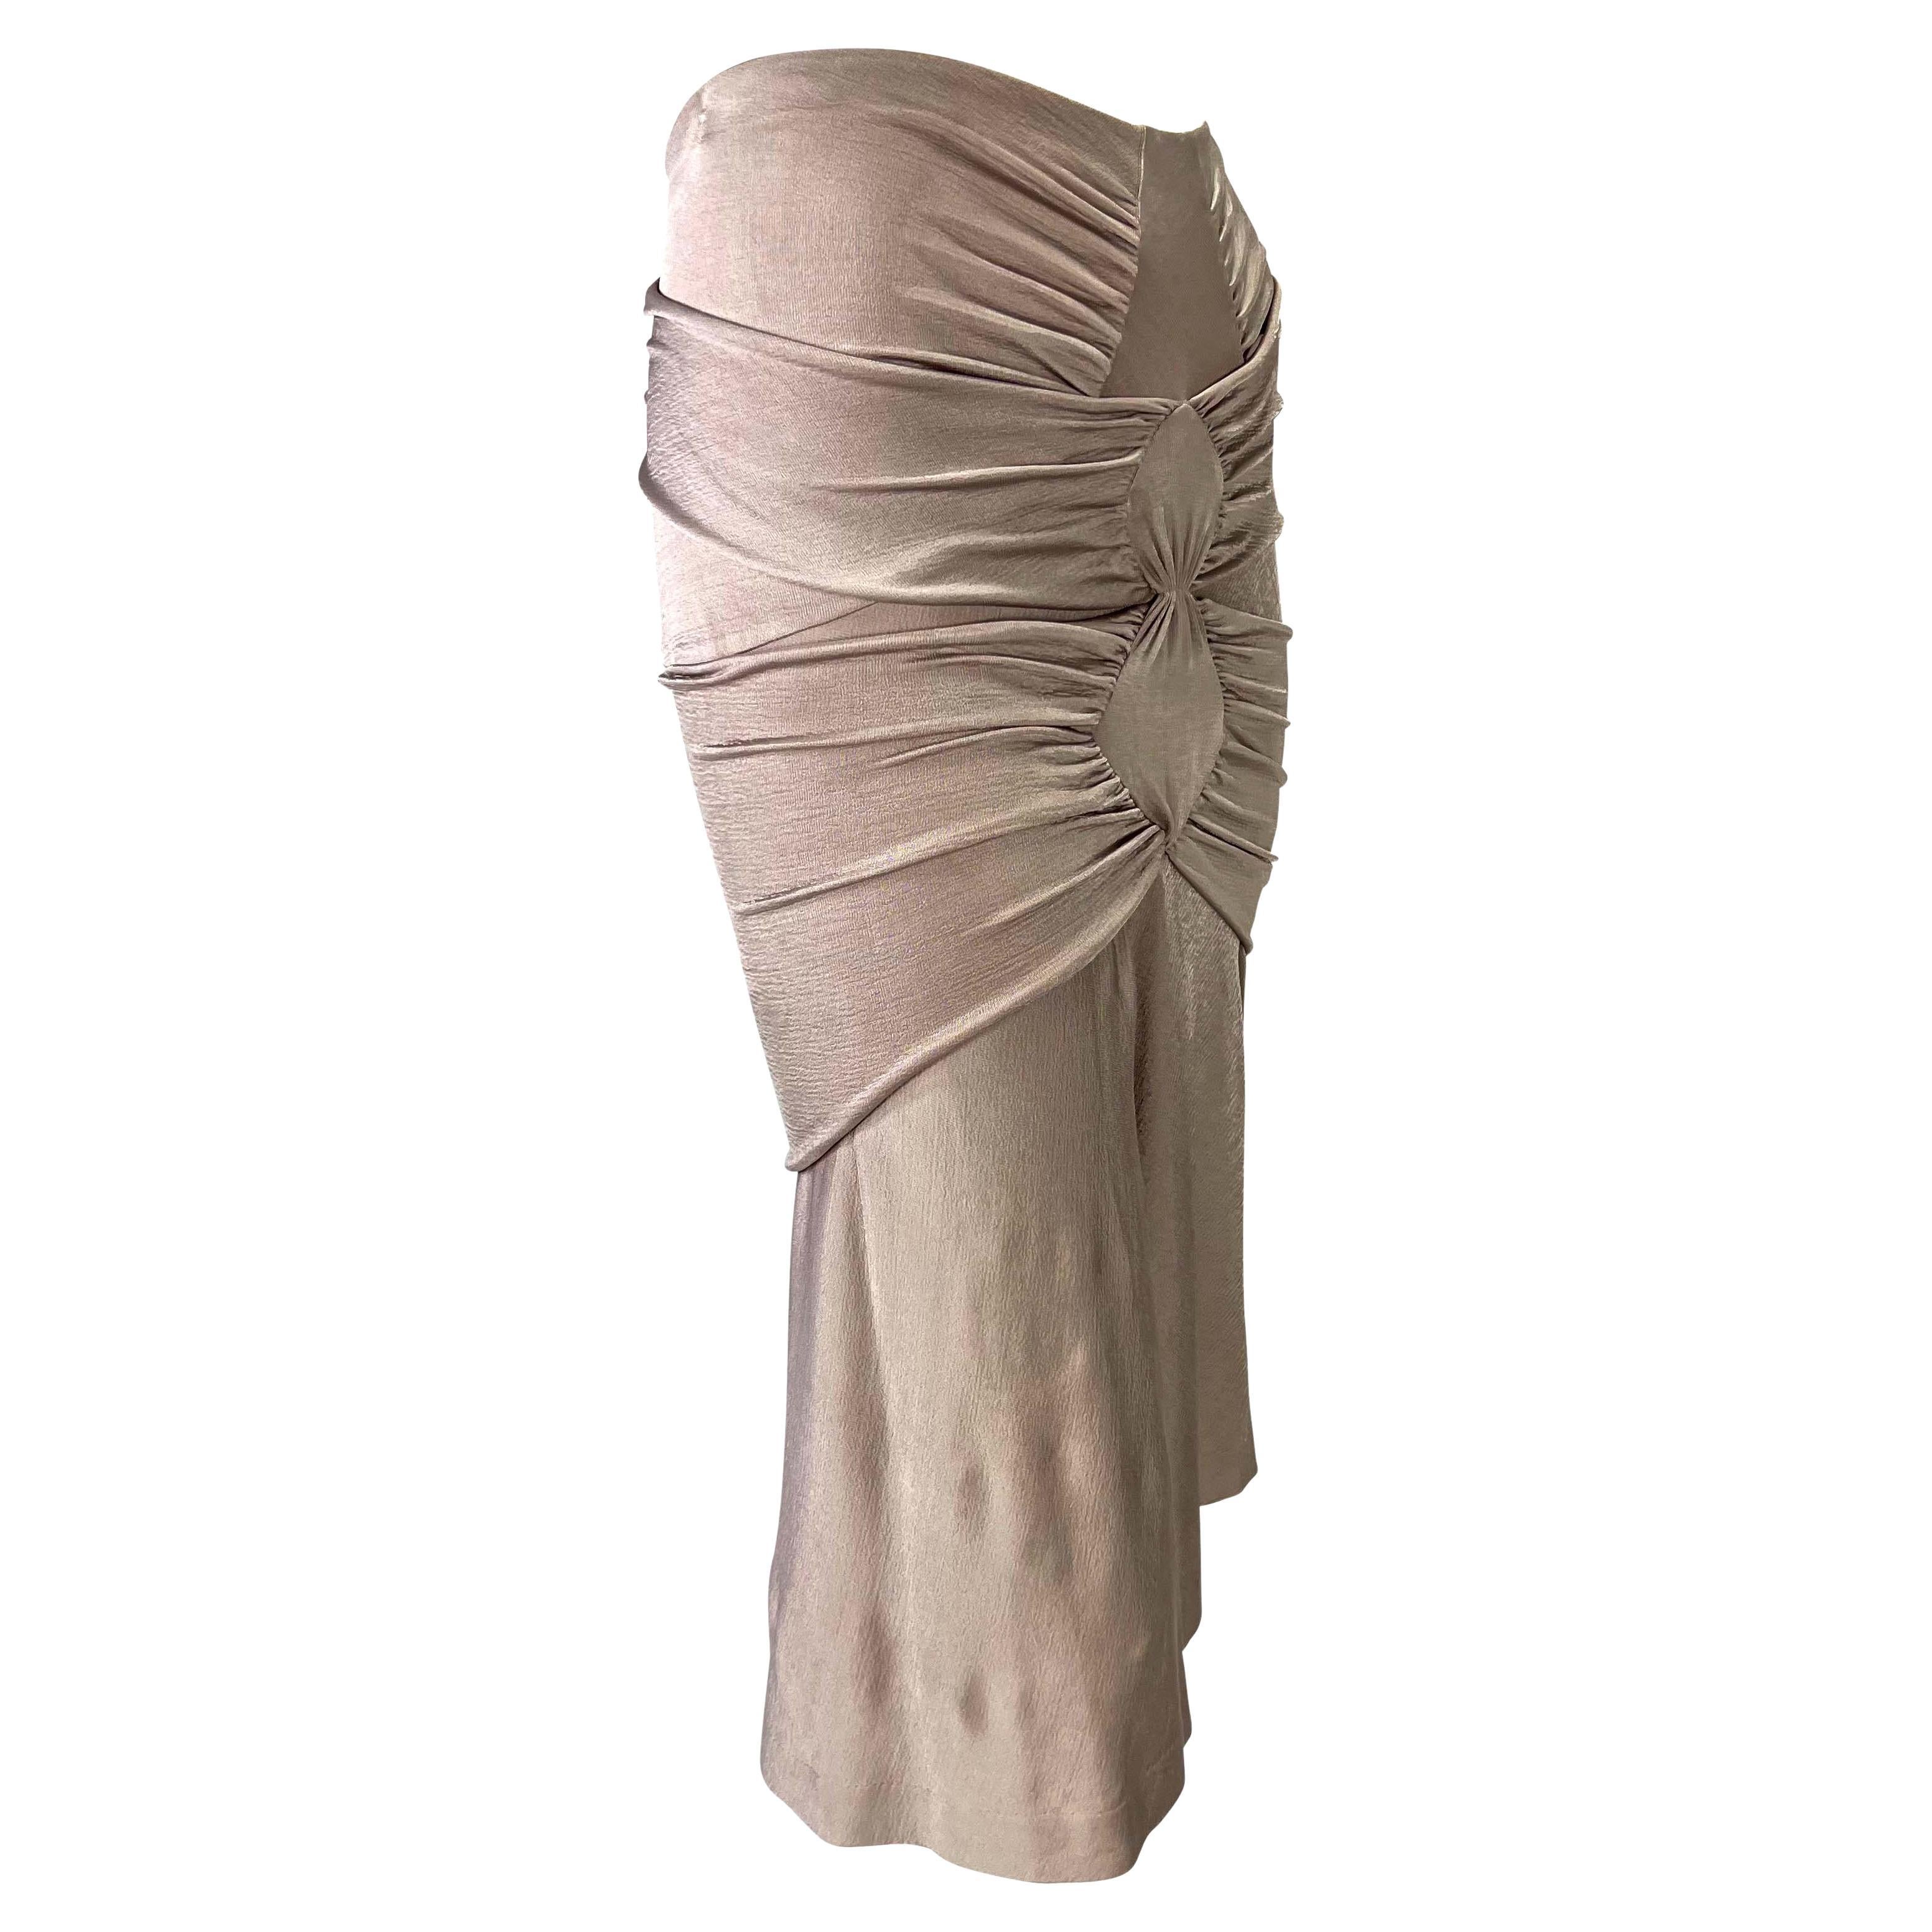 S/S 2003 Yves Saint Laurent by Tom Ford Runway Dusty Lavender Ruched Skirt For Sale 3